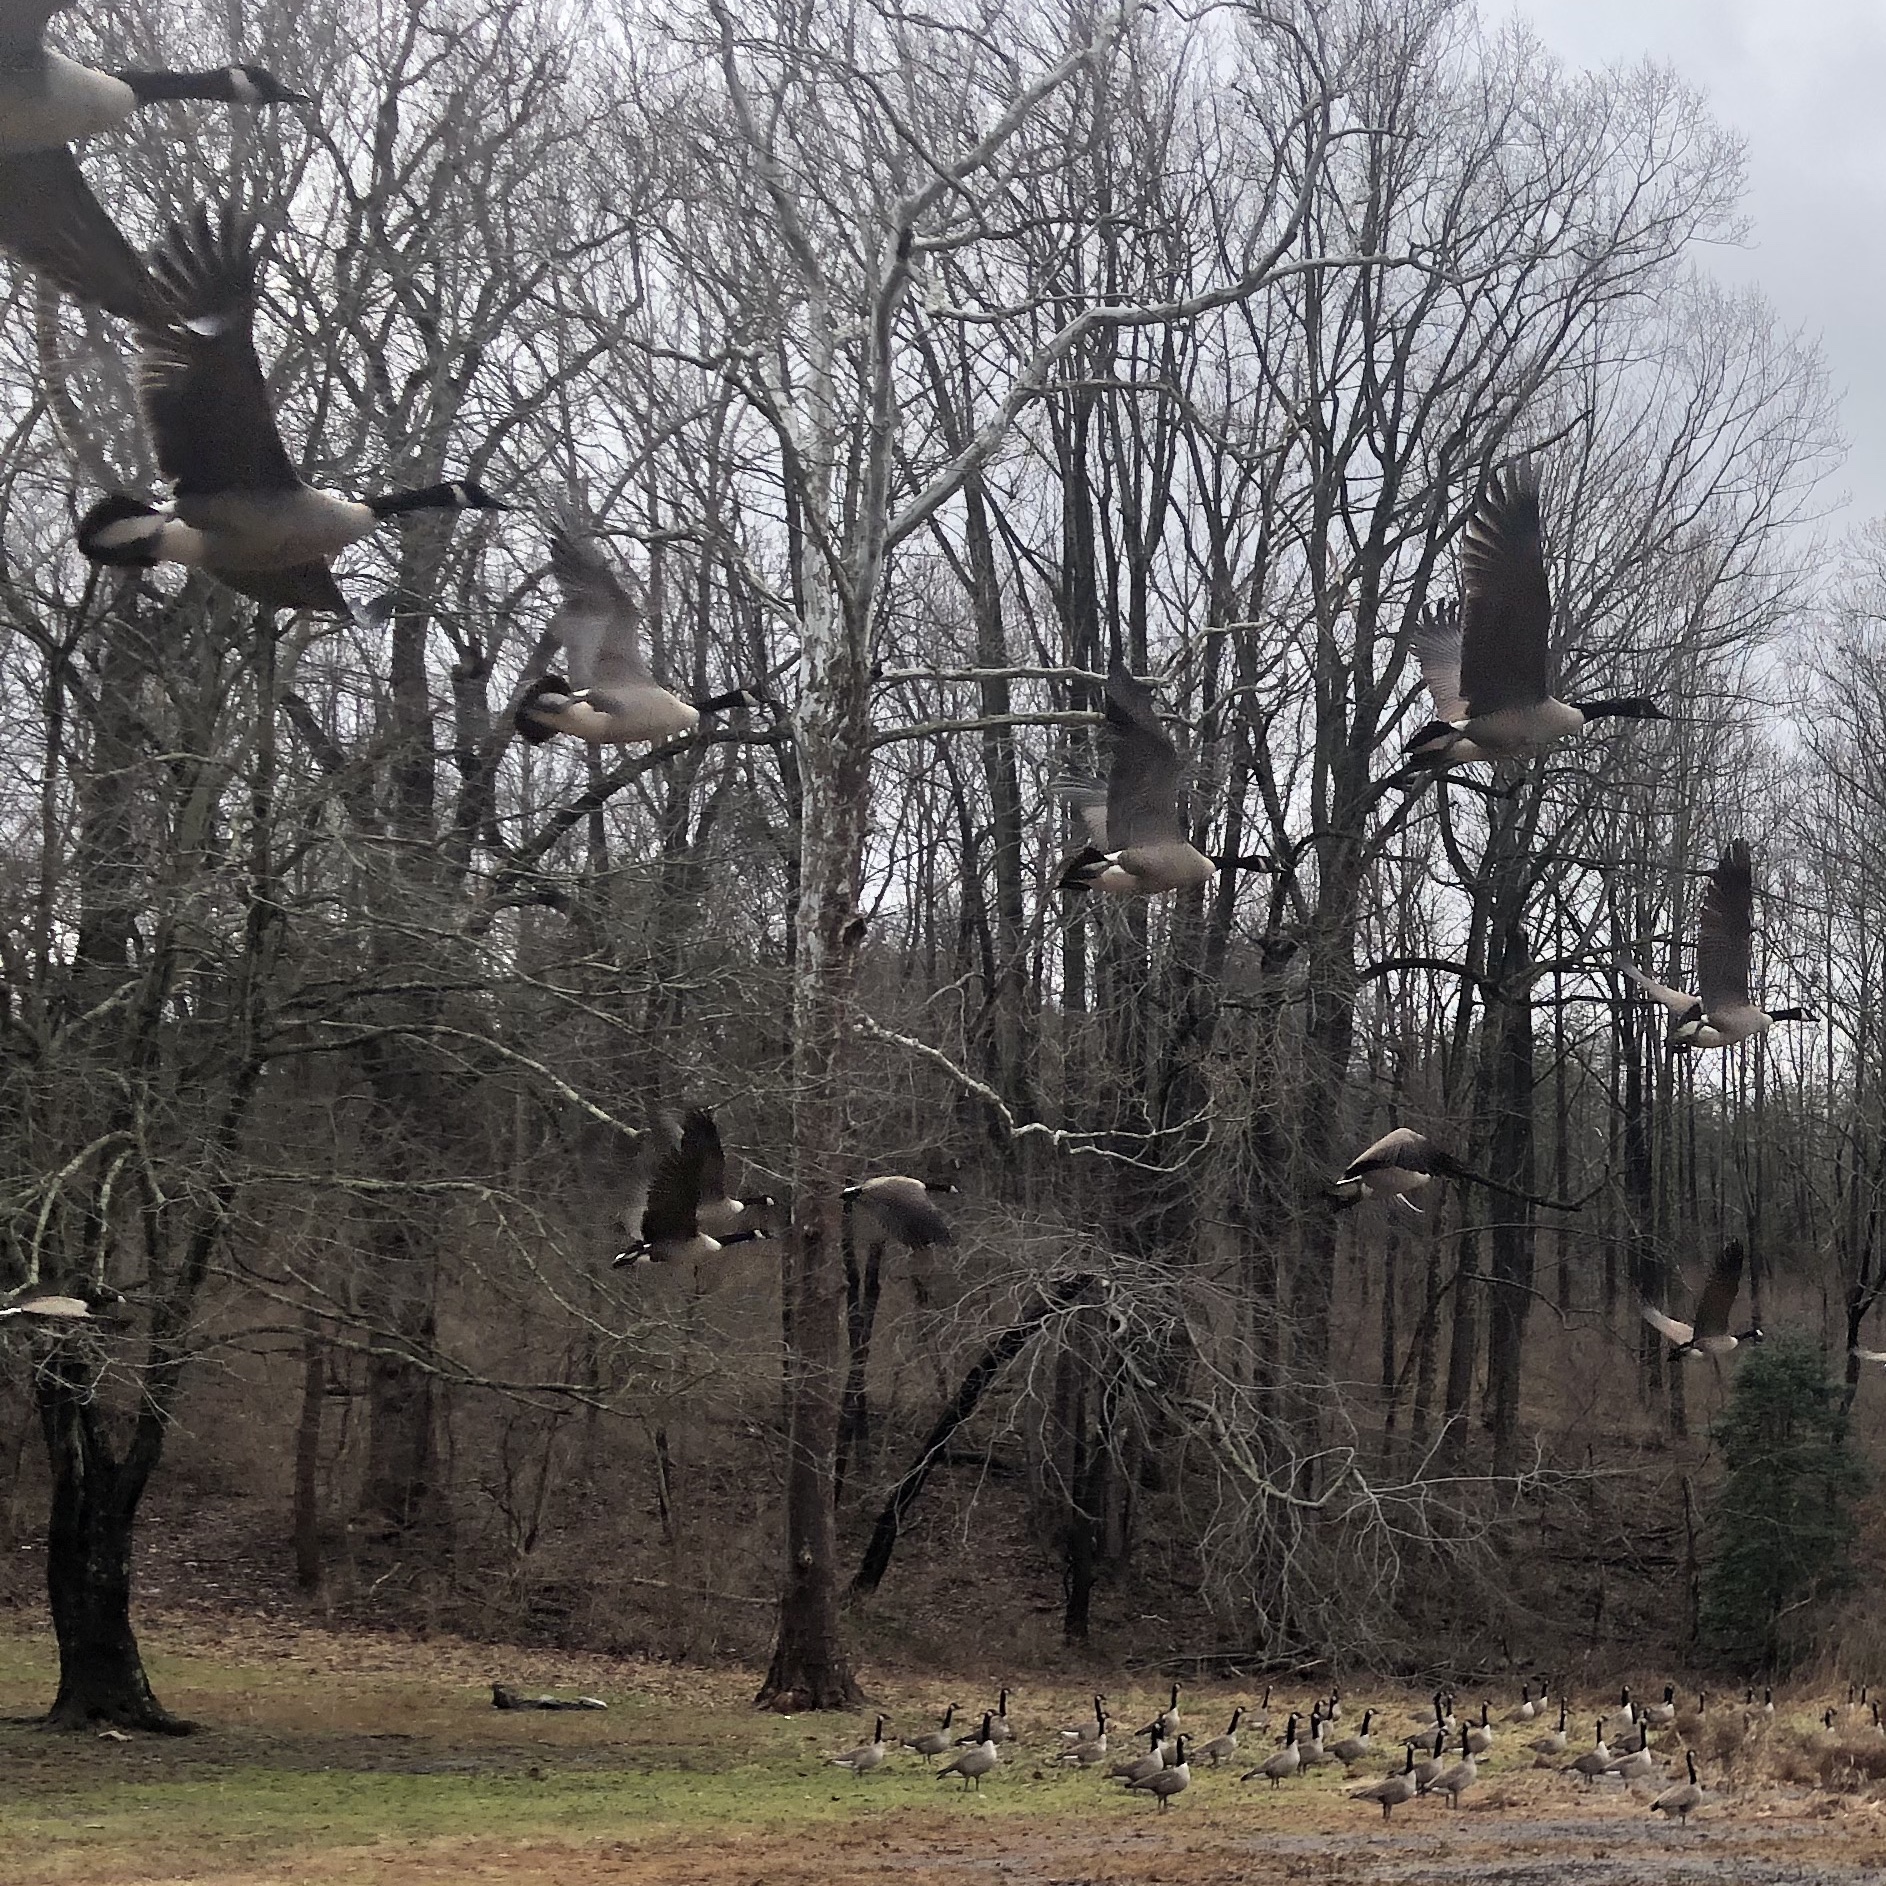 Geese flying away during photo op!